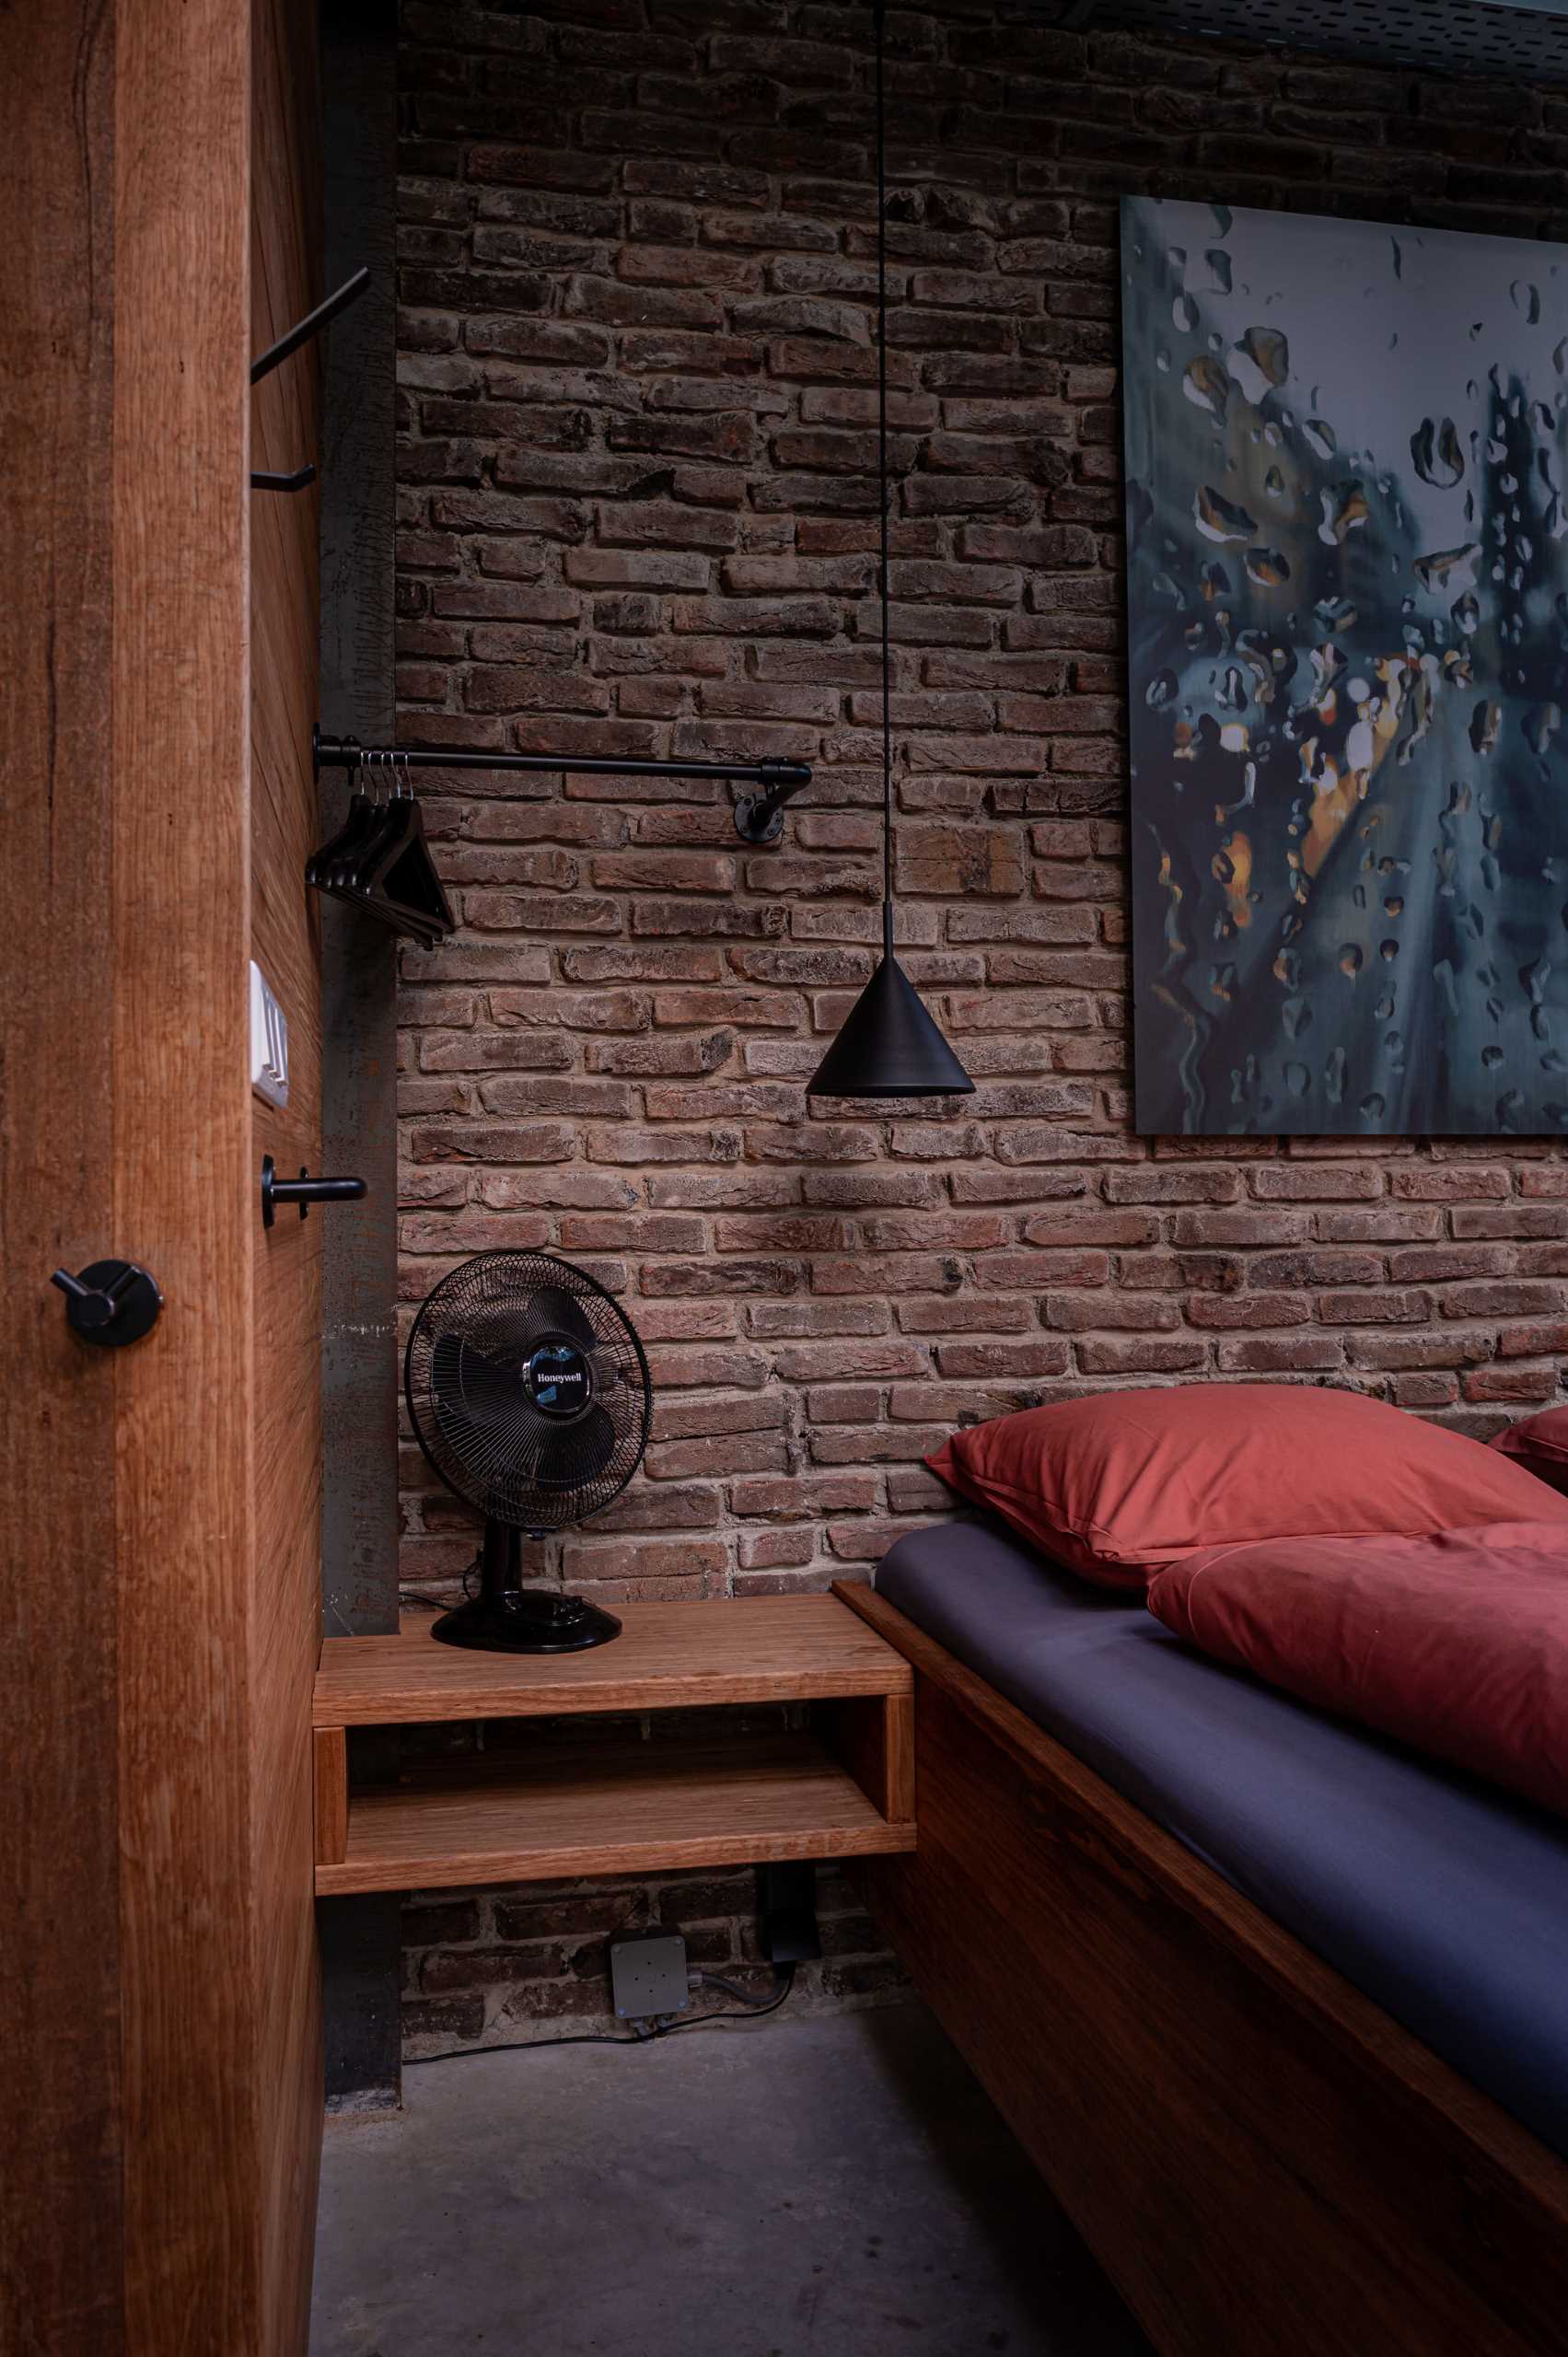 This bedroom with a brick wall has an open bathroom.